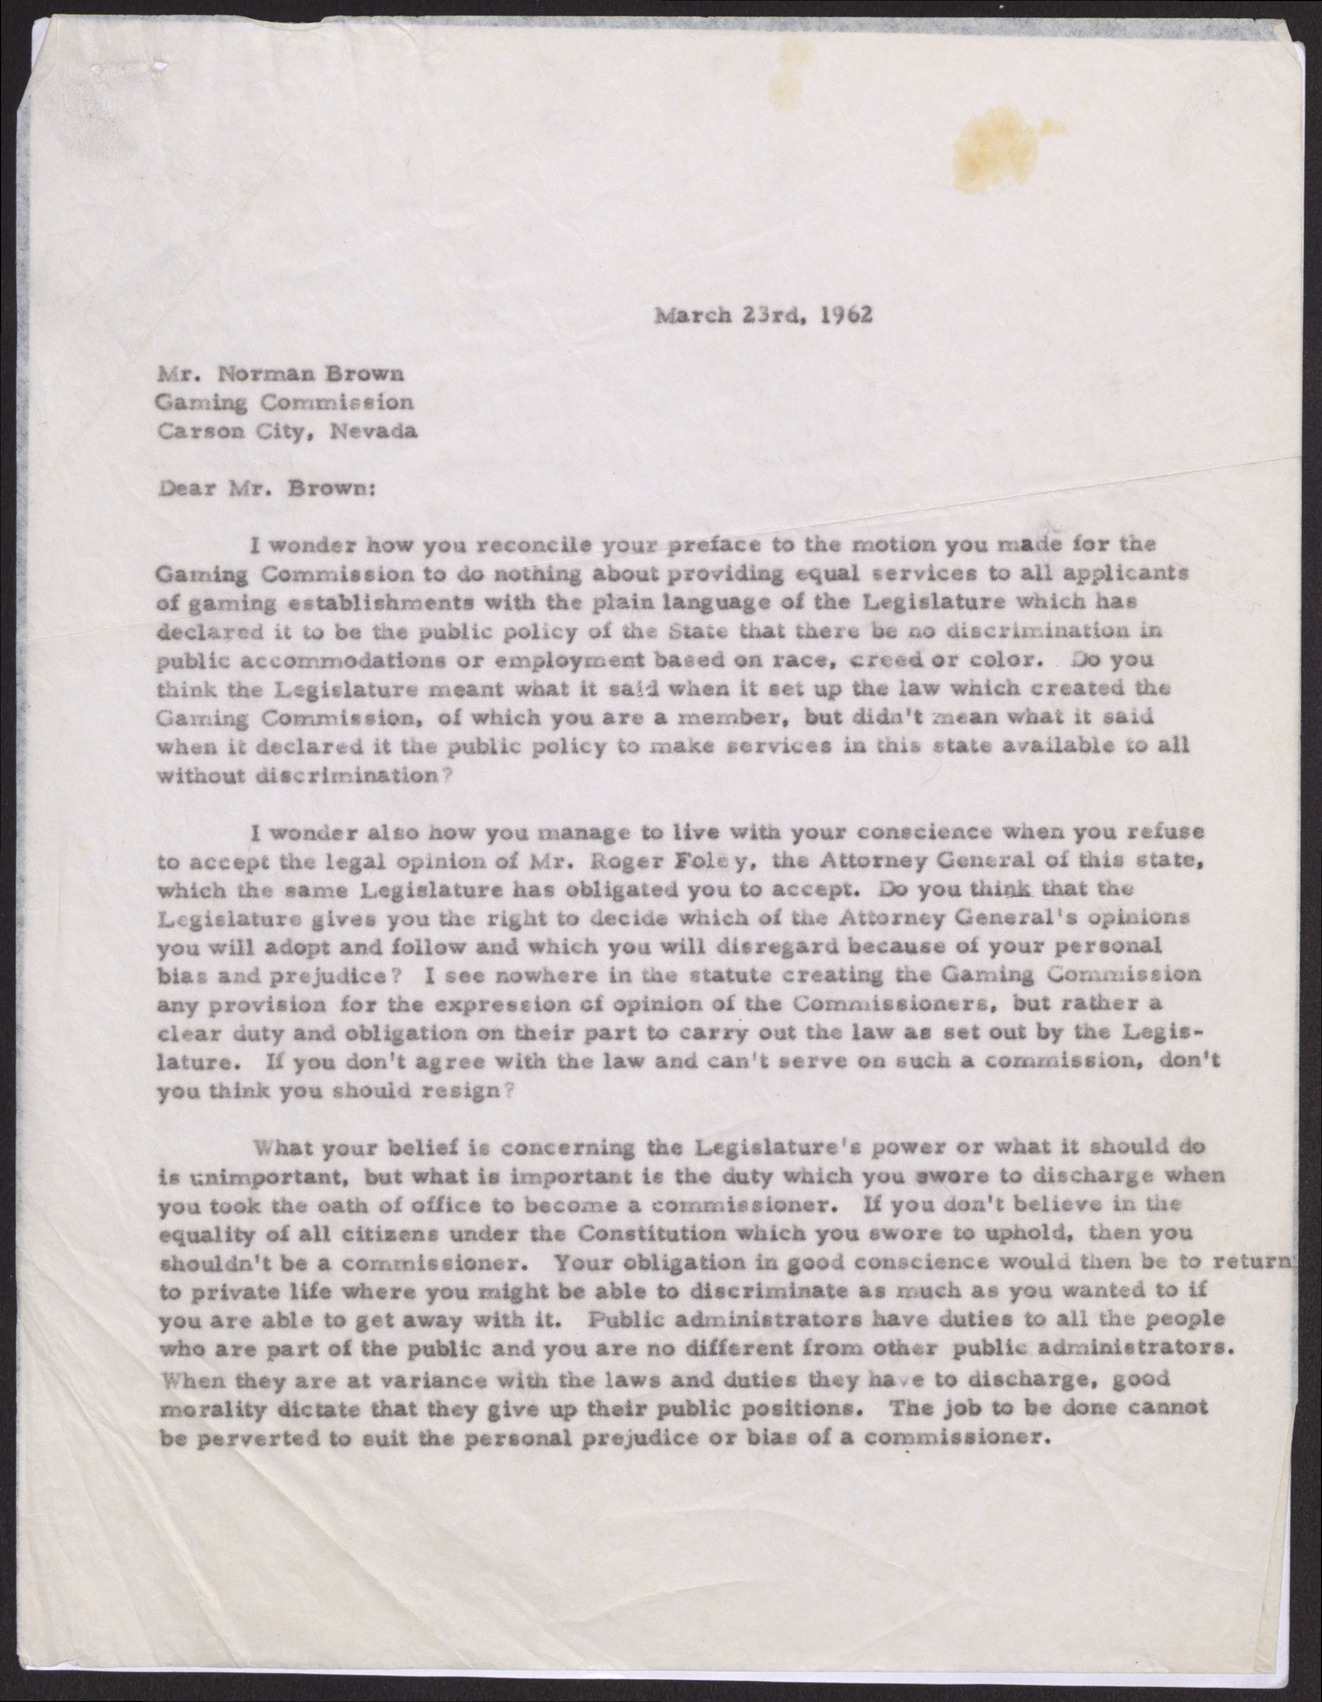 Letter to Mr. Norman Brown from Rev. Donald M. Clark (2 pages), March 23, 1962